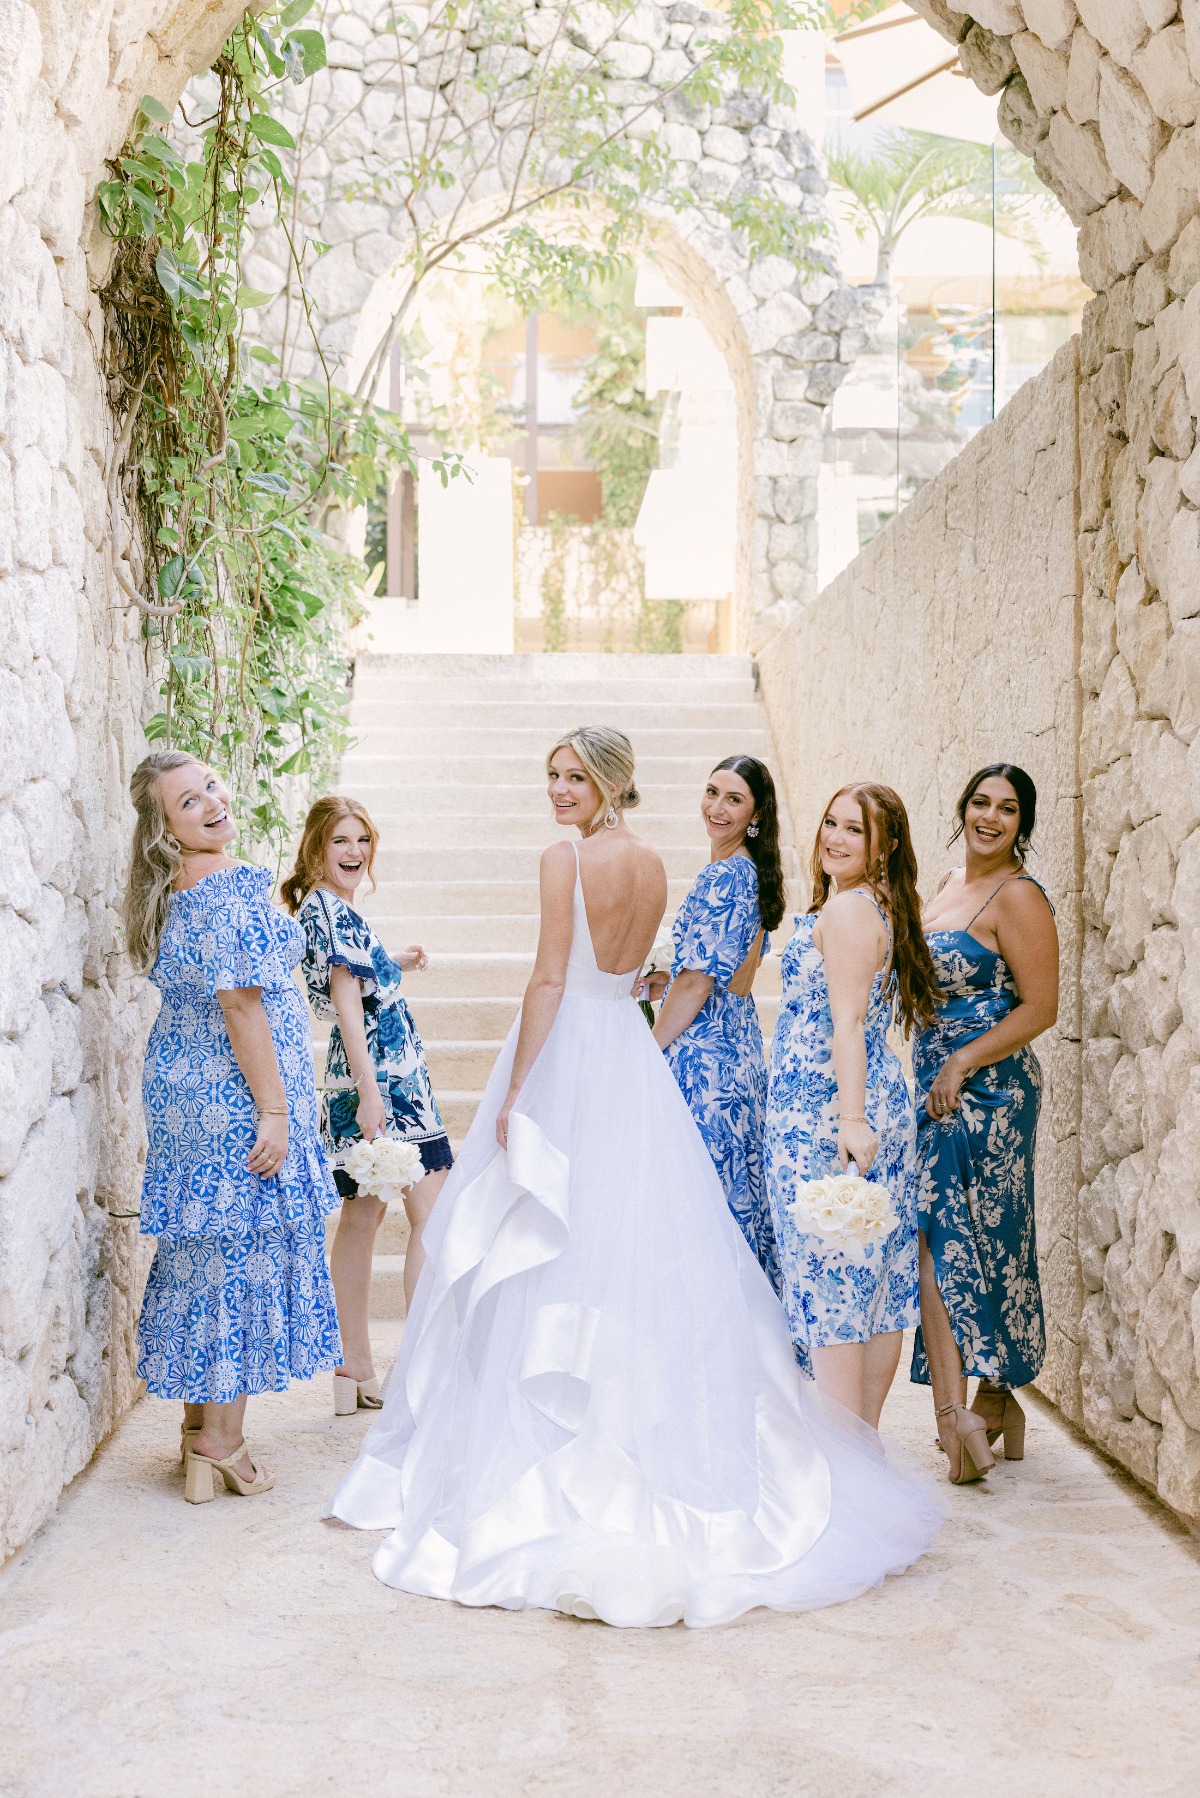 Blue and white patterned bridesmaid dresses